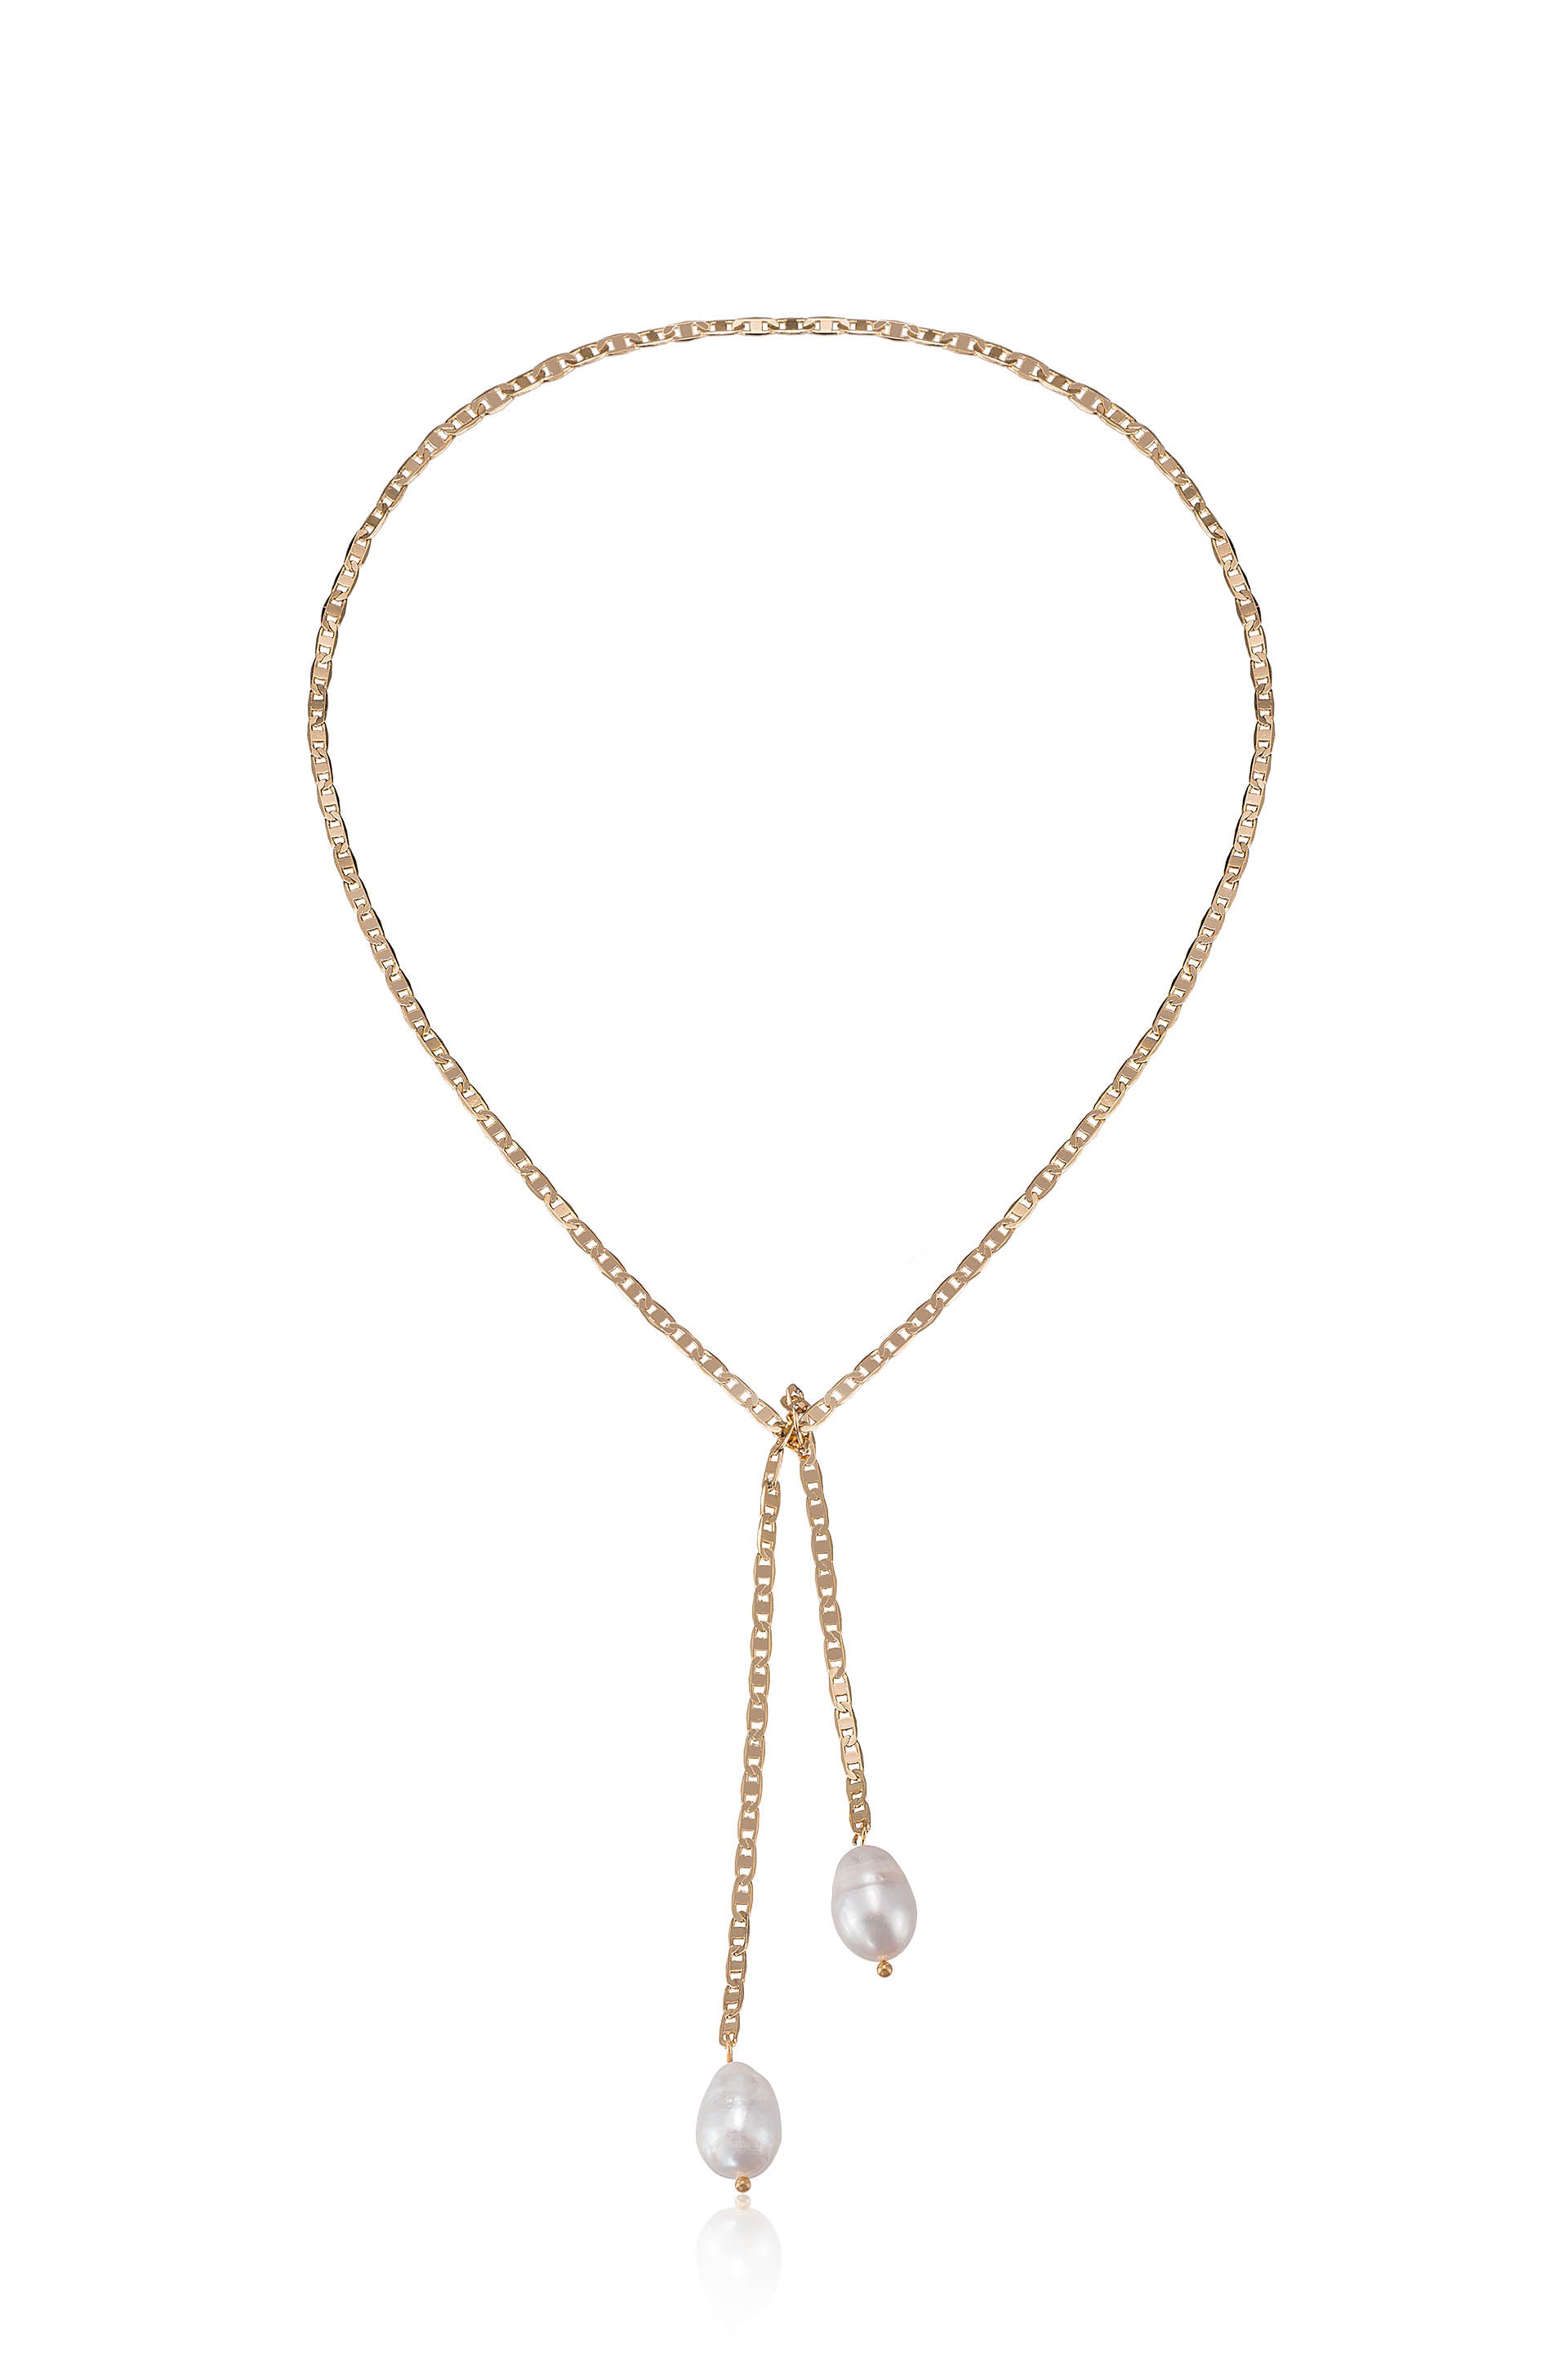 Minimalist 18k Gold Plated Chain and Freshwater Pearl Bolo Lariat Necklace full